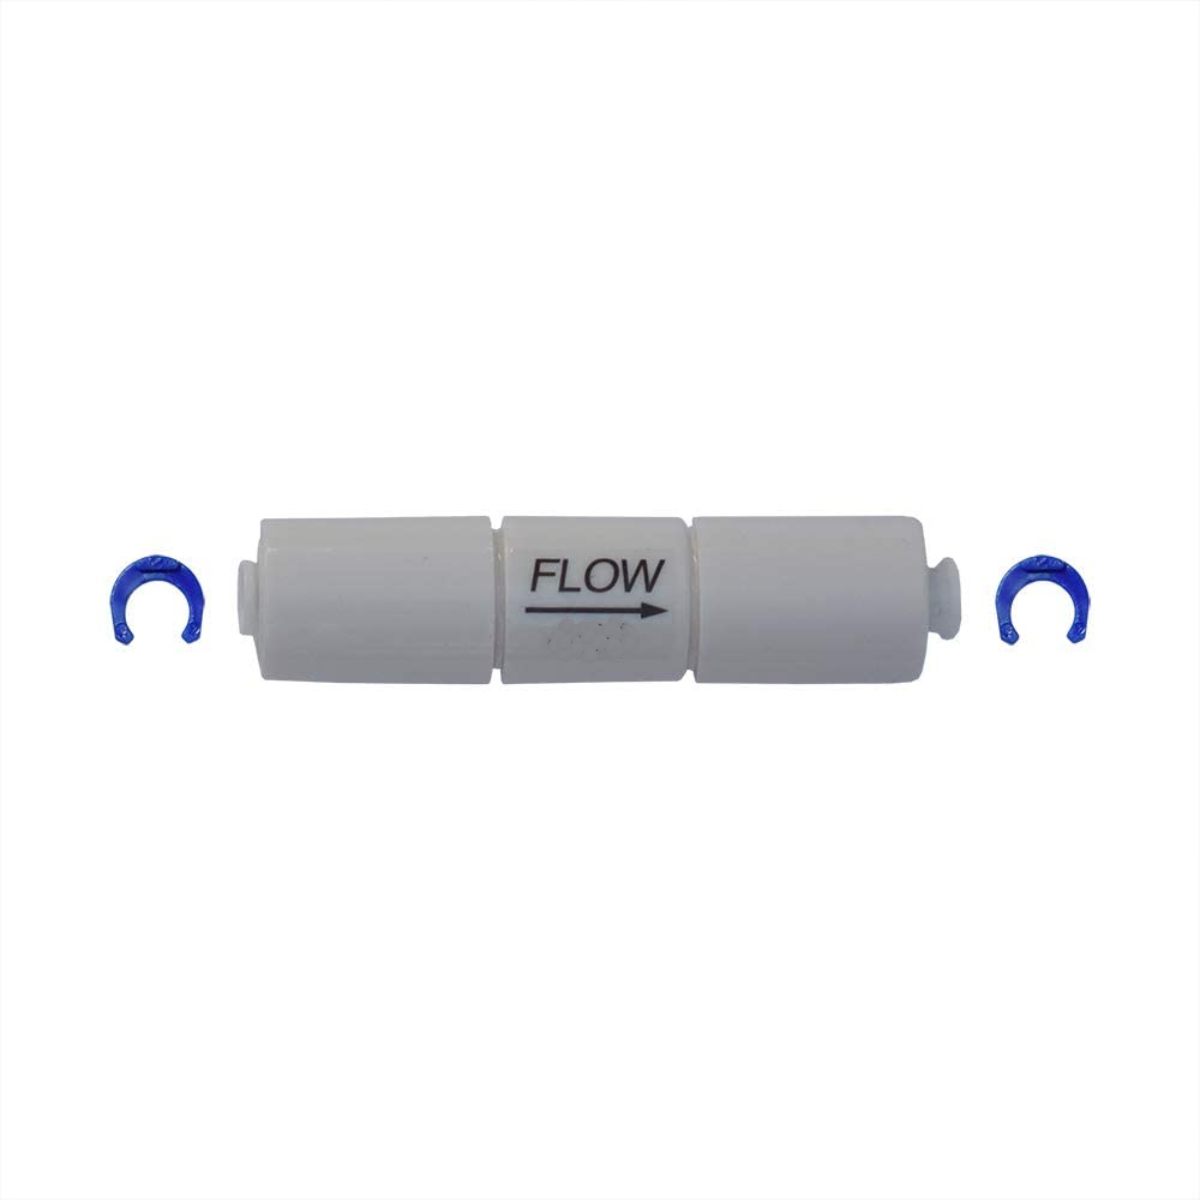 Waste Water Flow Restrictor for Reverse Osmosis Systems, choice 400ML, 450ML, 500ML, 550ML. or